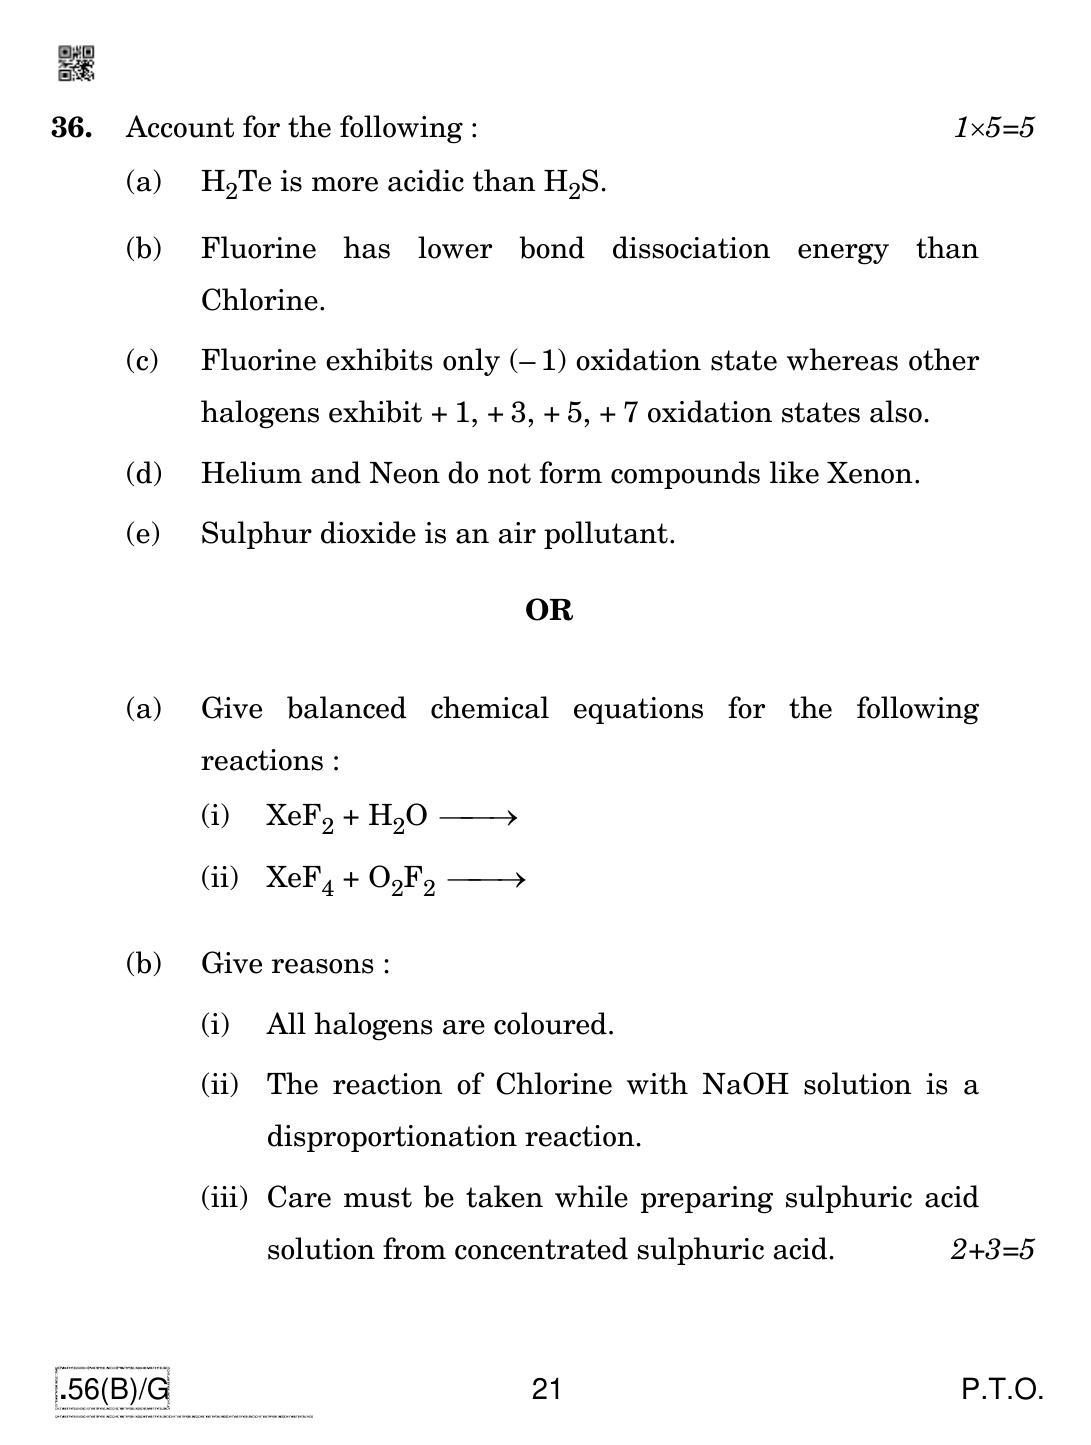 CBSE Class 12 56(B)-C - Chemistry For Blind Candidates 2020 Compartment Question Paper - Page 21